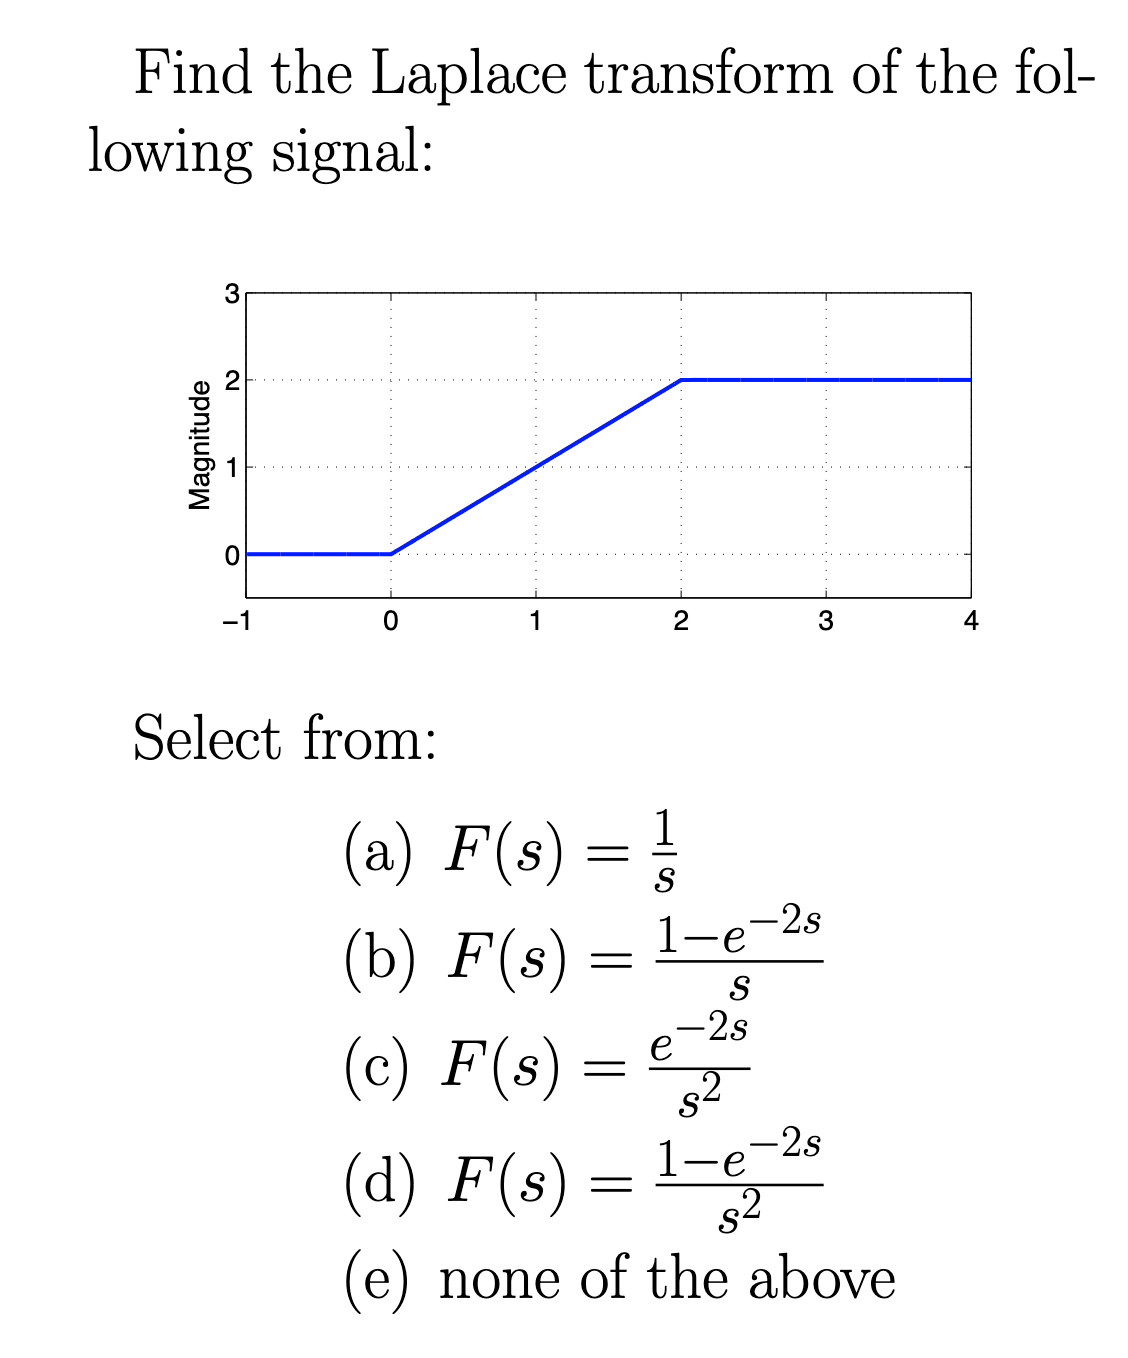 Find the Laplace transform of the fol-
lowing signal:
Magnitude
3
N
O
-1
0
Select from:
1
2
=
(a) F'(s) = 1
S
1-e
(b) F(s)
S
-2s
(c) F(s)
s²
2s
(d) F(s) = 1-6-²8
(e) none of the above
3
e
-2s
4